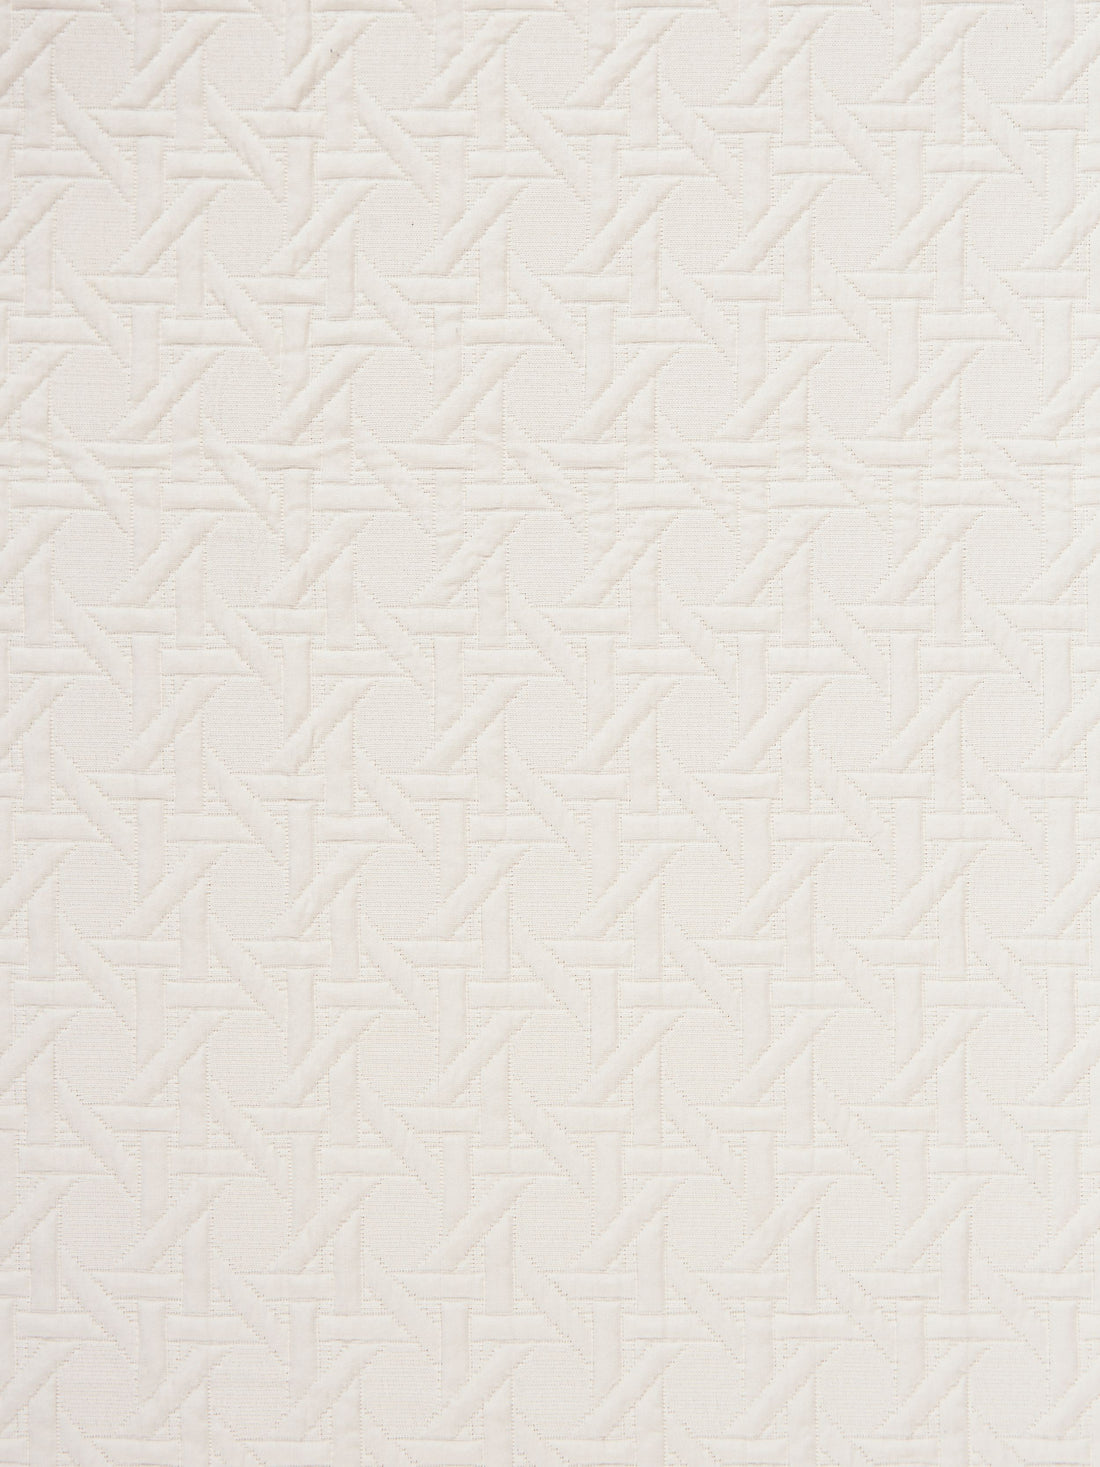 Canestro Matelasse fabric in ivory color - pattern number SC 000227008 - by Scalamandre in the Scalamandre Fabrics Book 1 collection